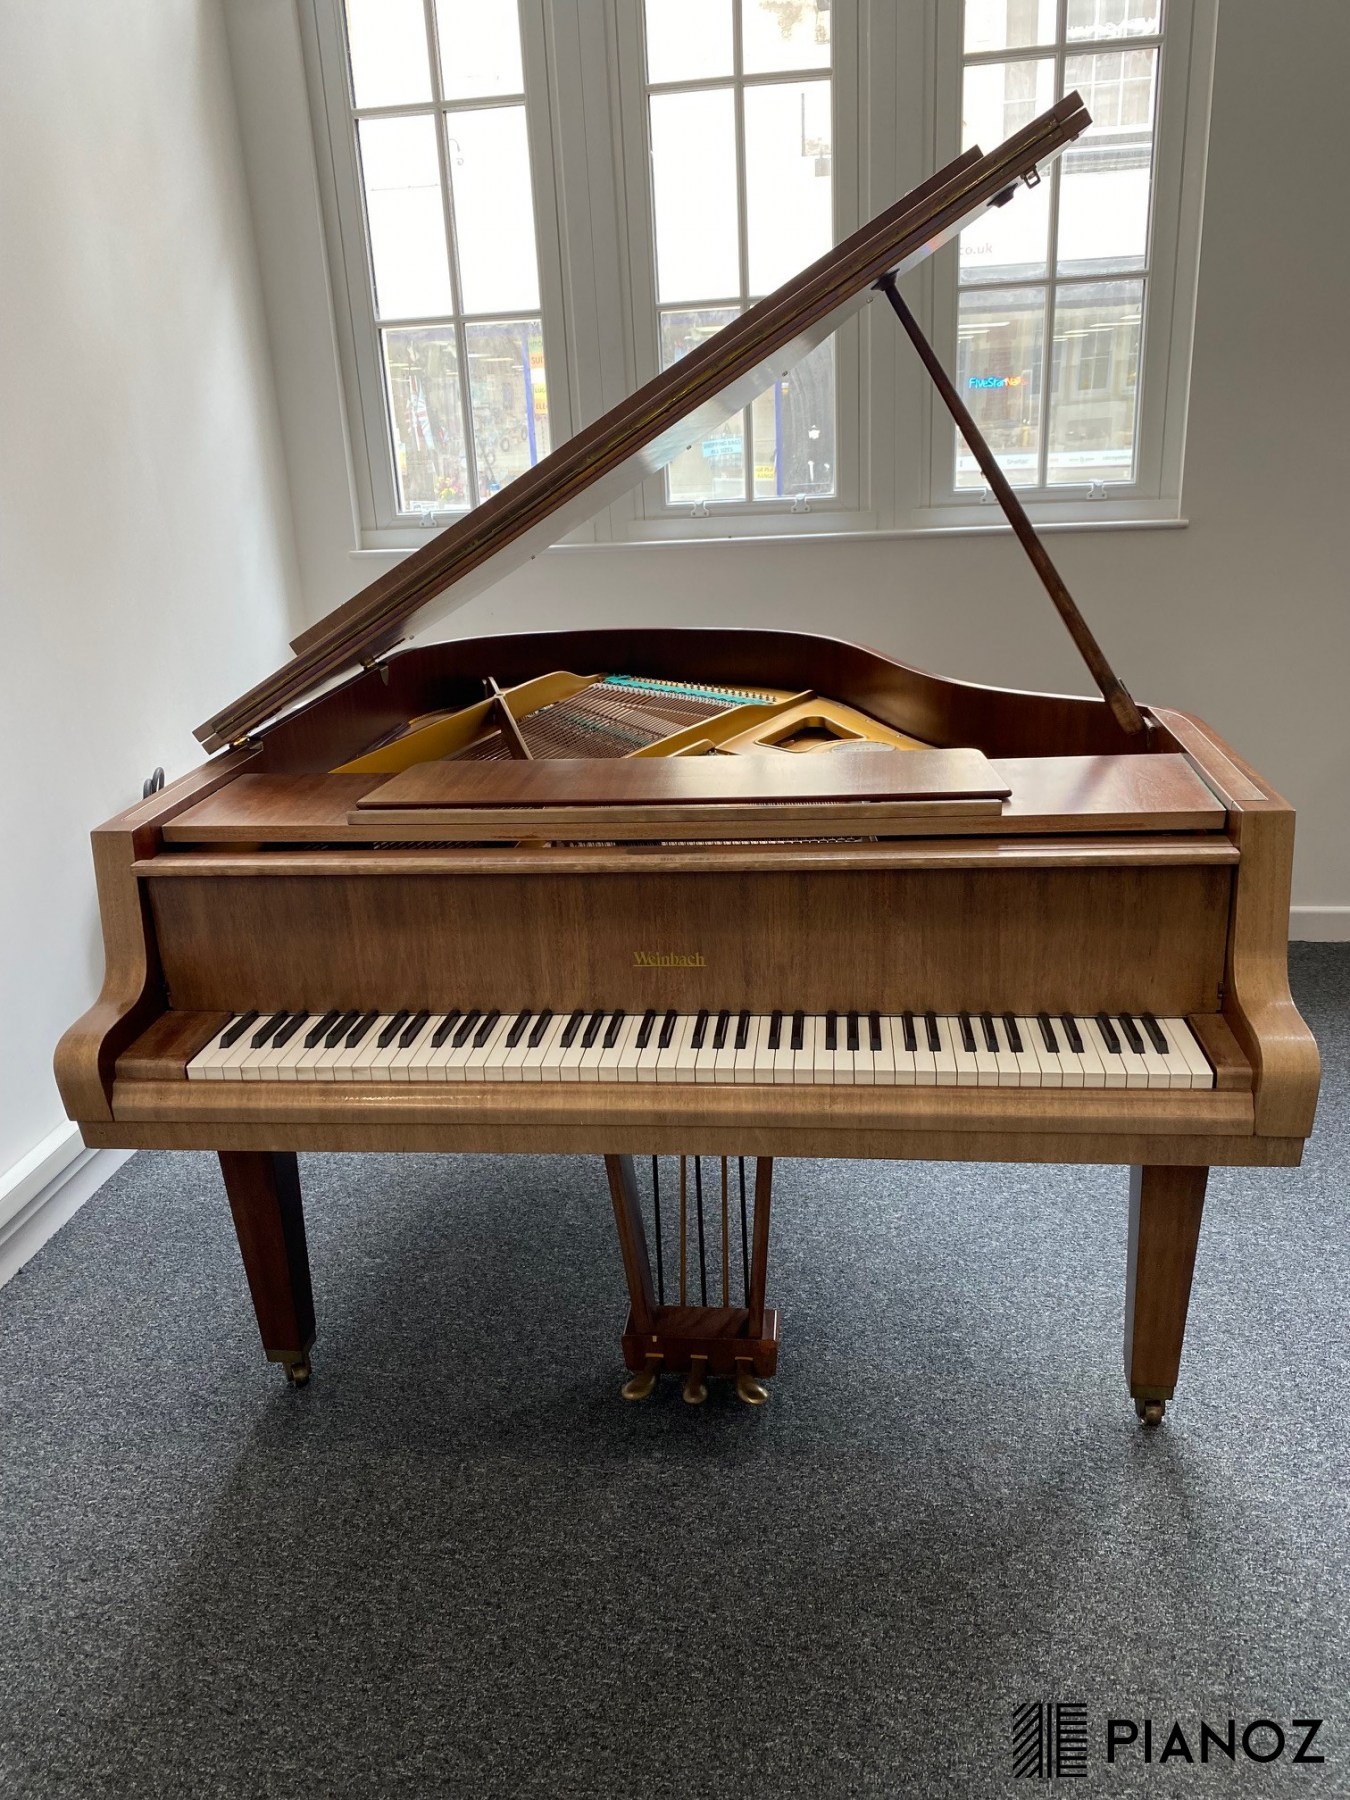 Weinbach by Petrof 173 Grand Piano piano for sale in UK